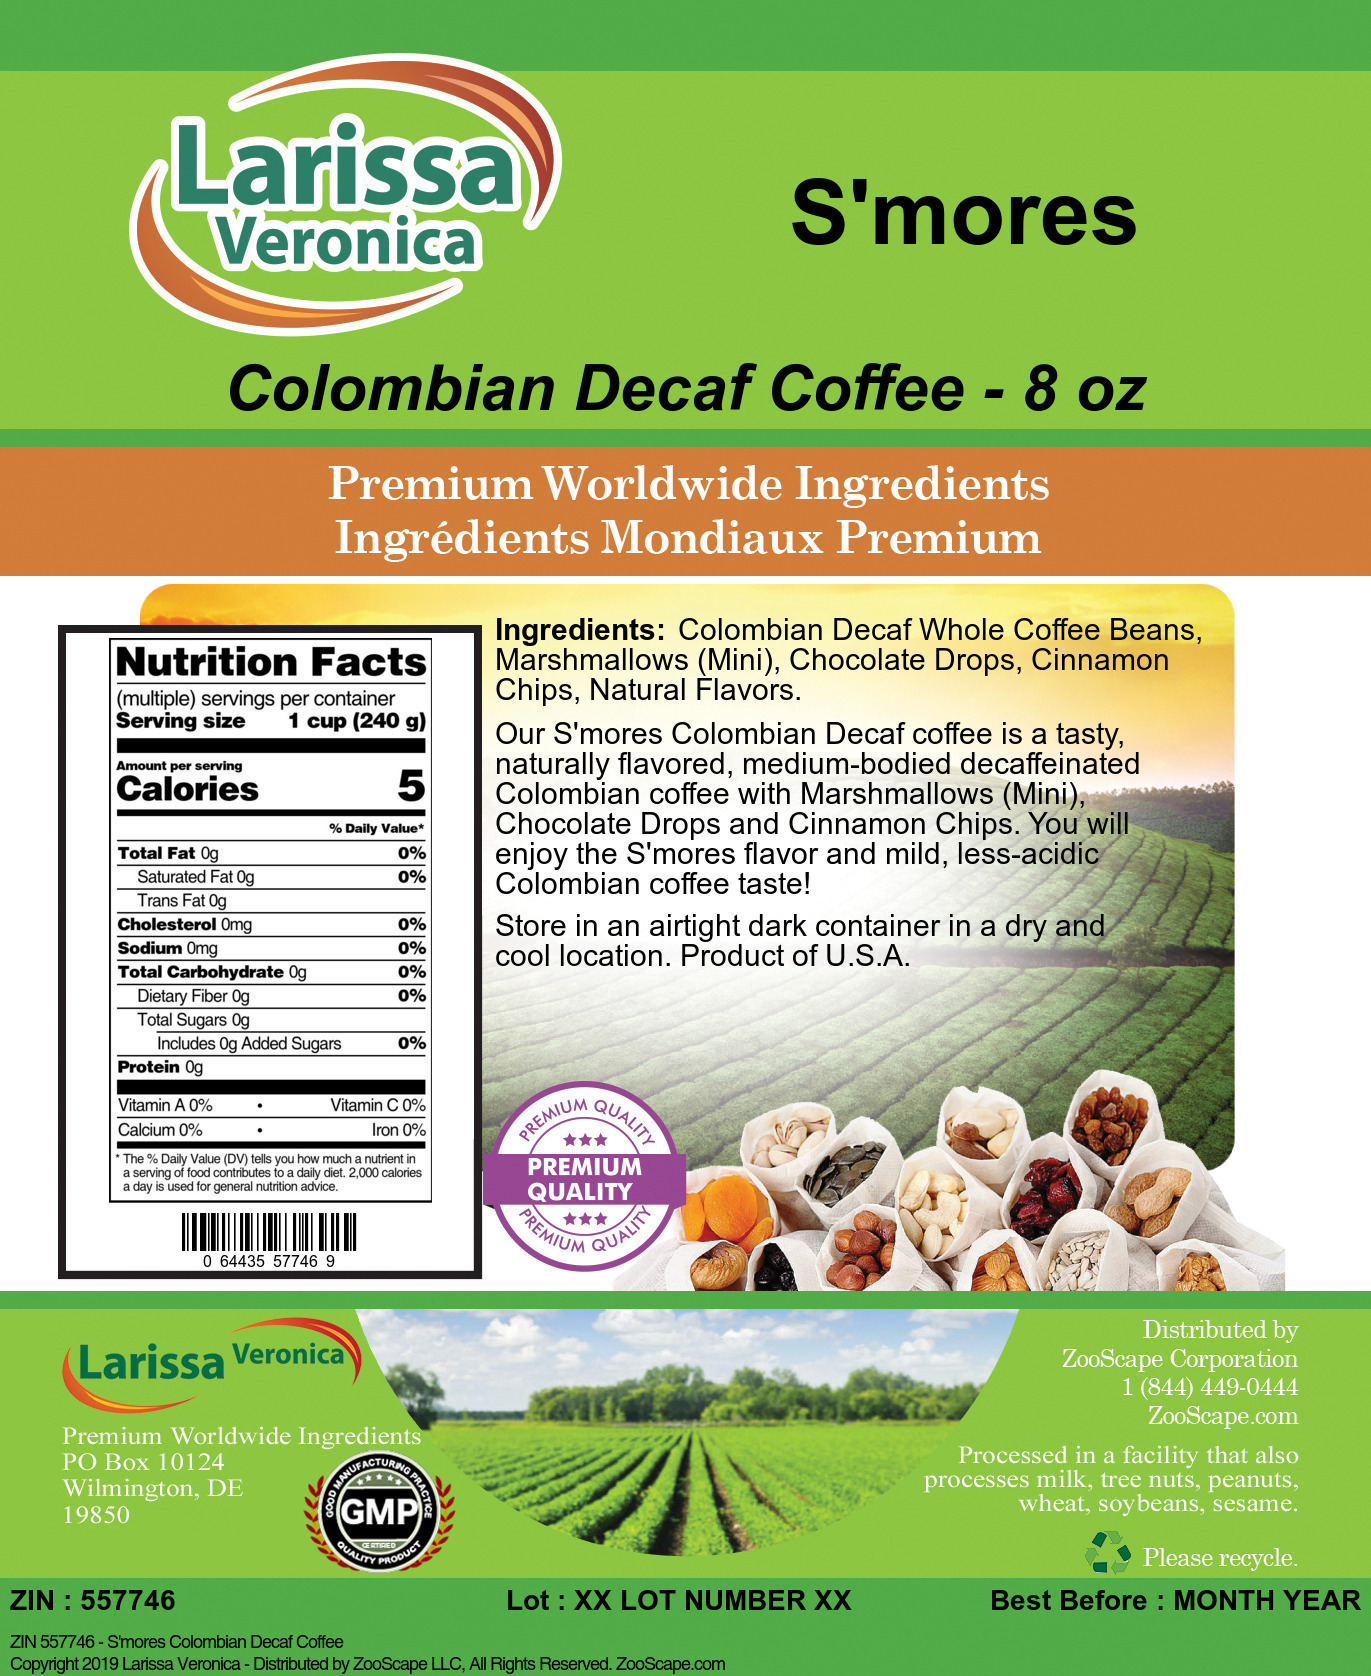 S'mores Colombian Decaf Coffee - Label